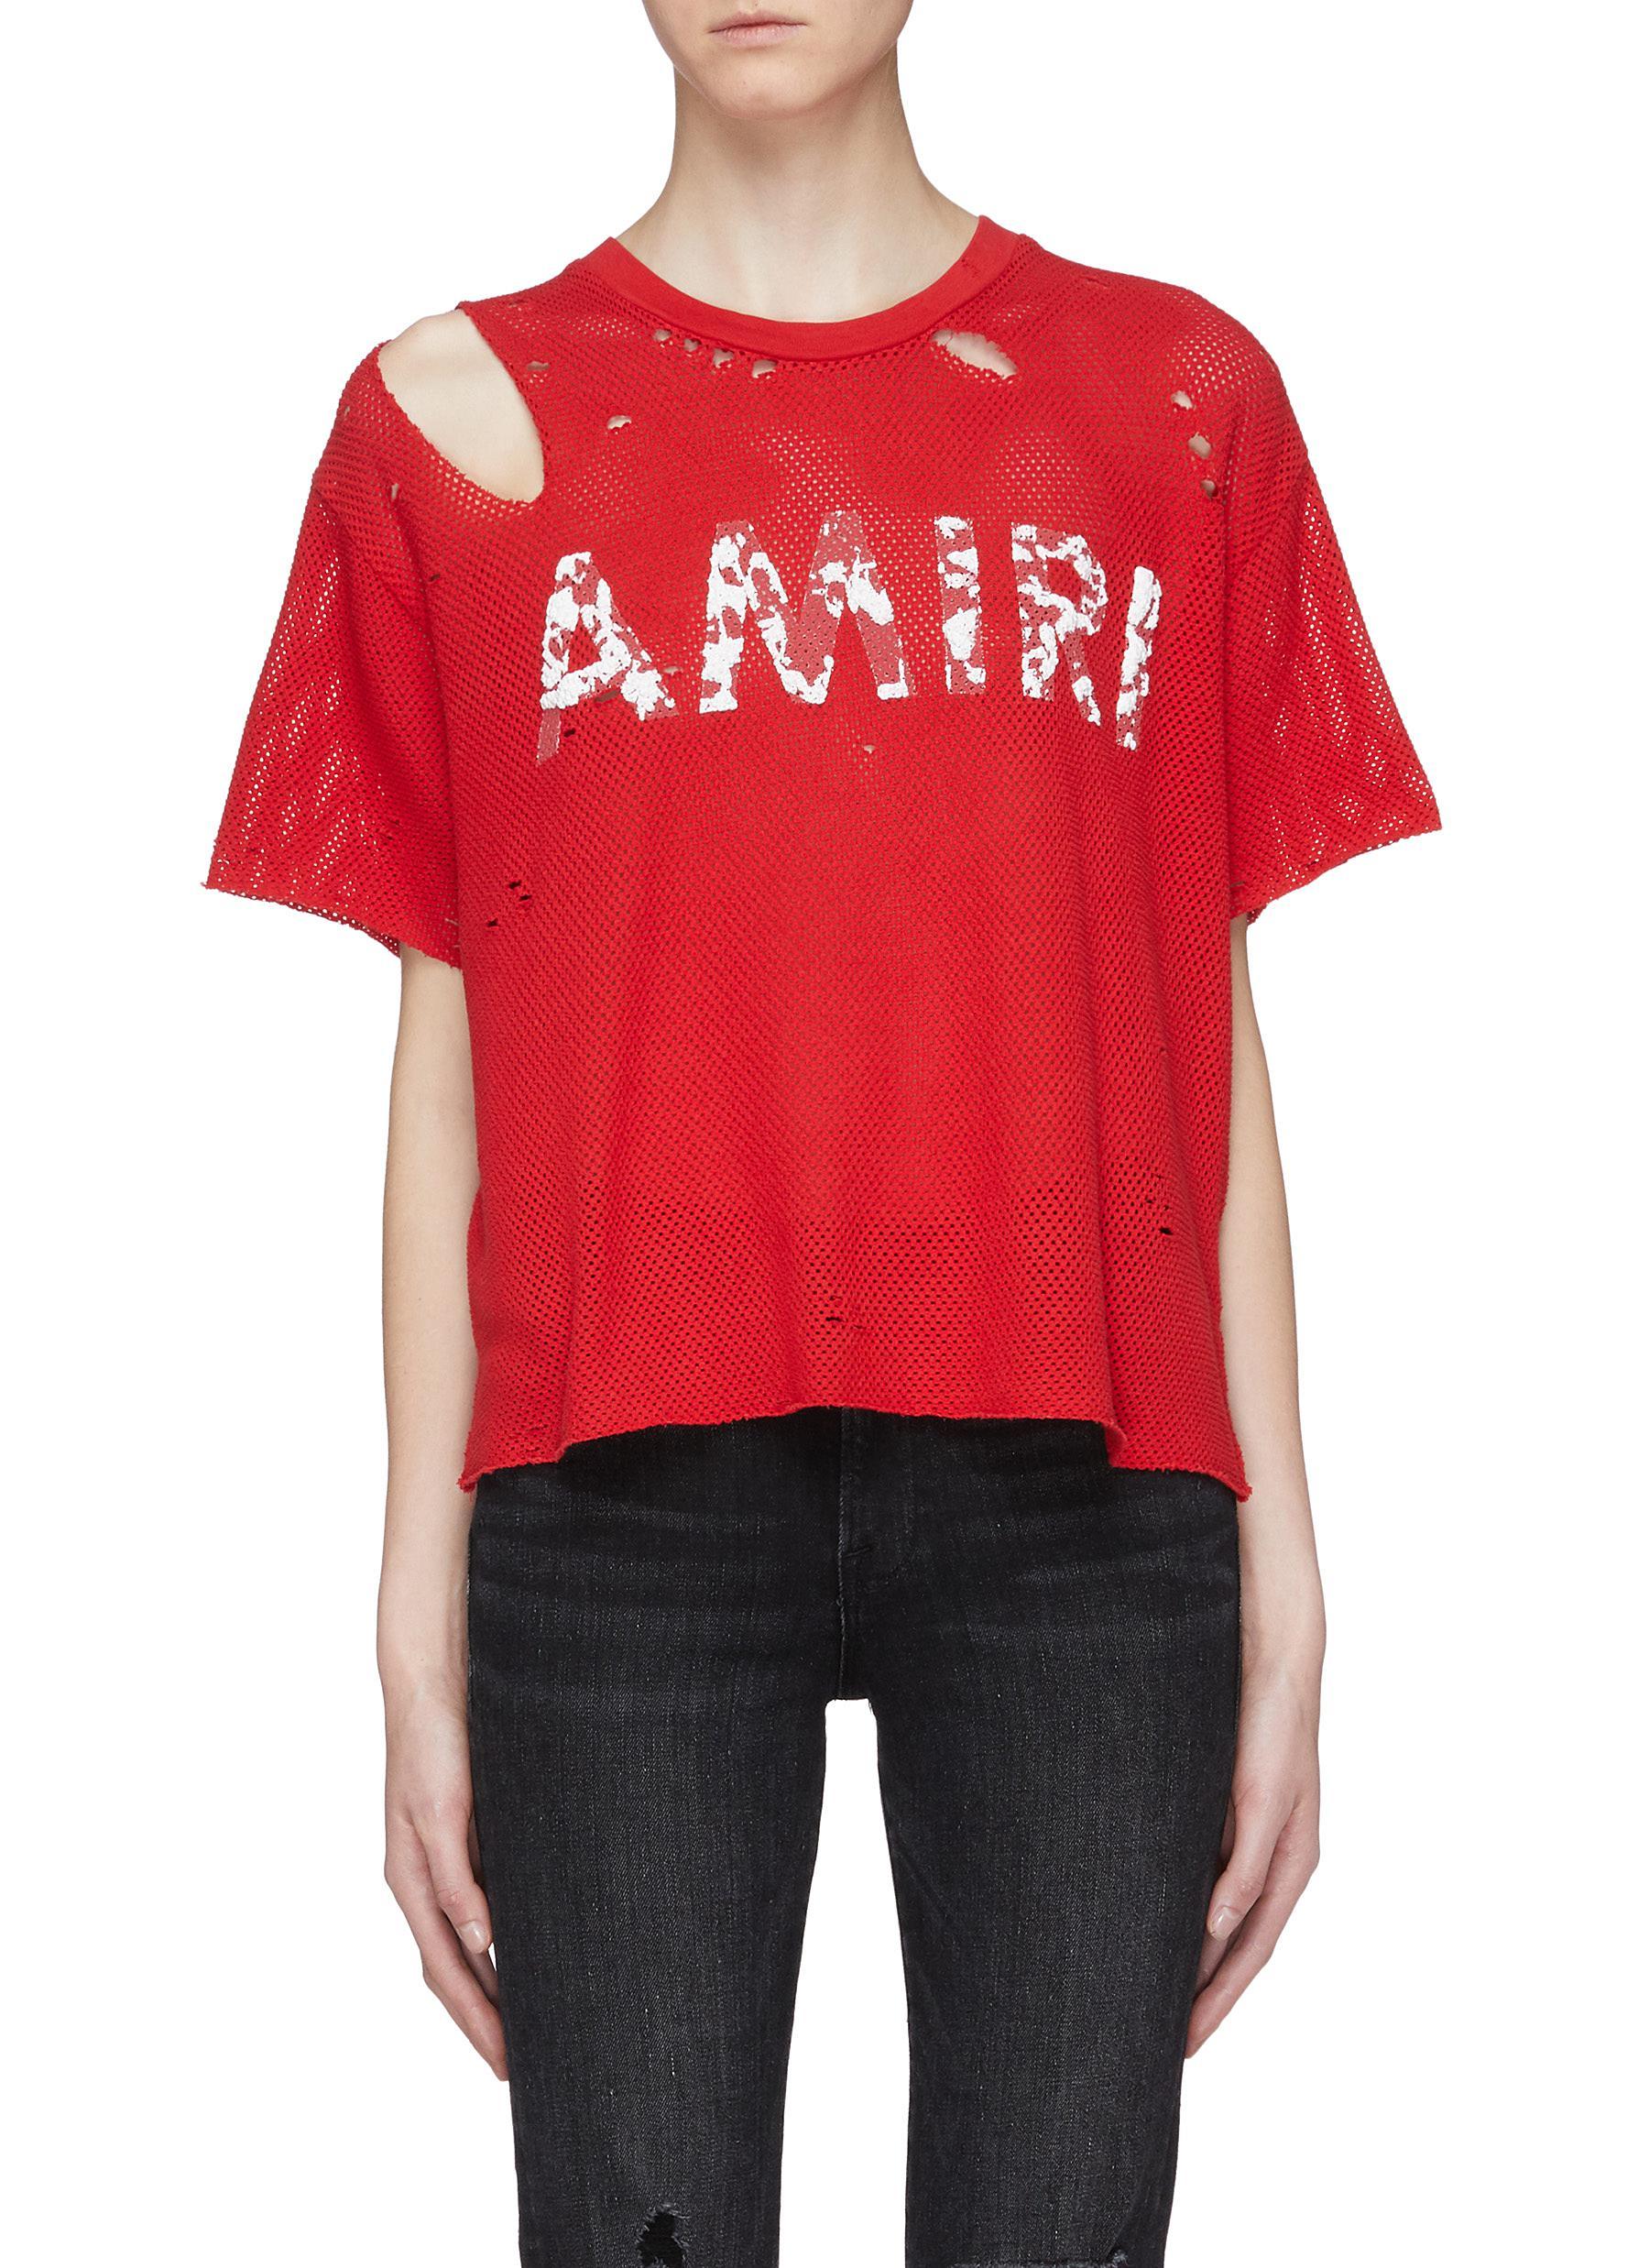 Amiri Logo Graphic Print Distressed Cropped T-shirt in Red - Lyst